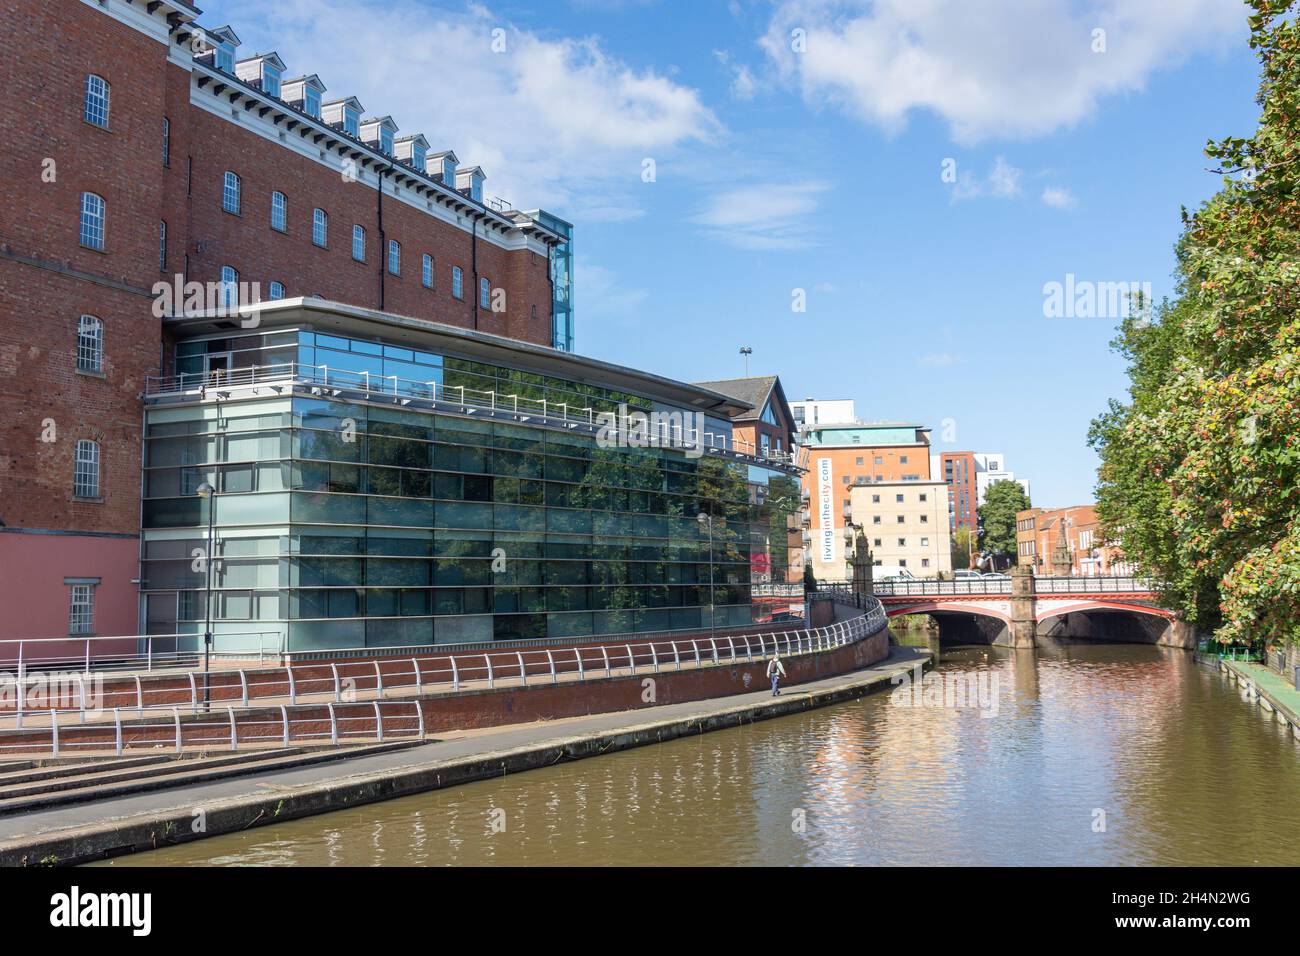 HM Land Registry building beside River Soar, City of Leicester, Leicestershire, England, United Kingdom Stock Photo